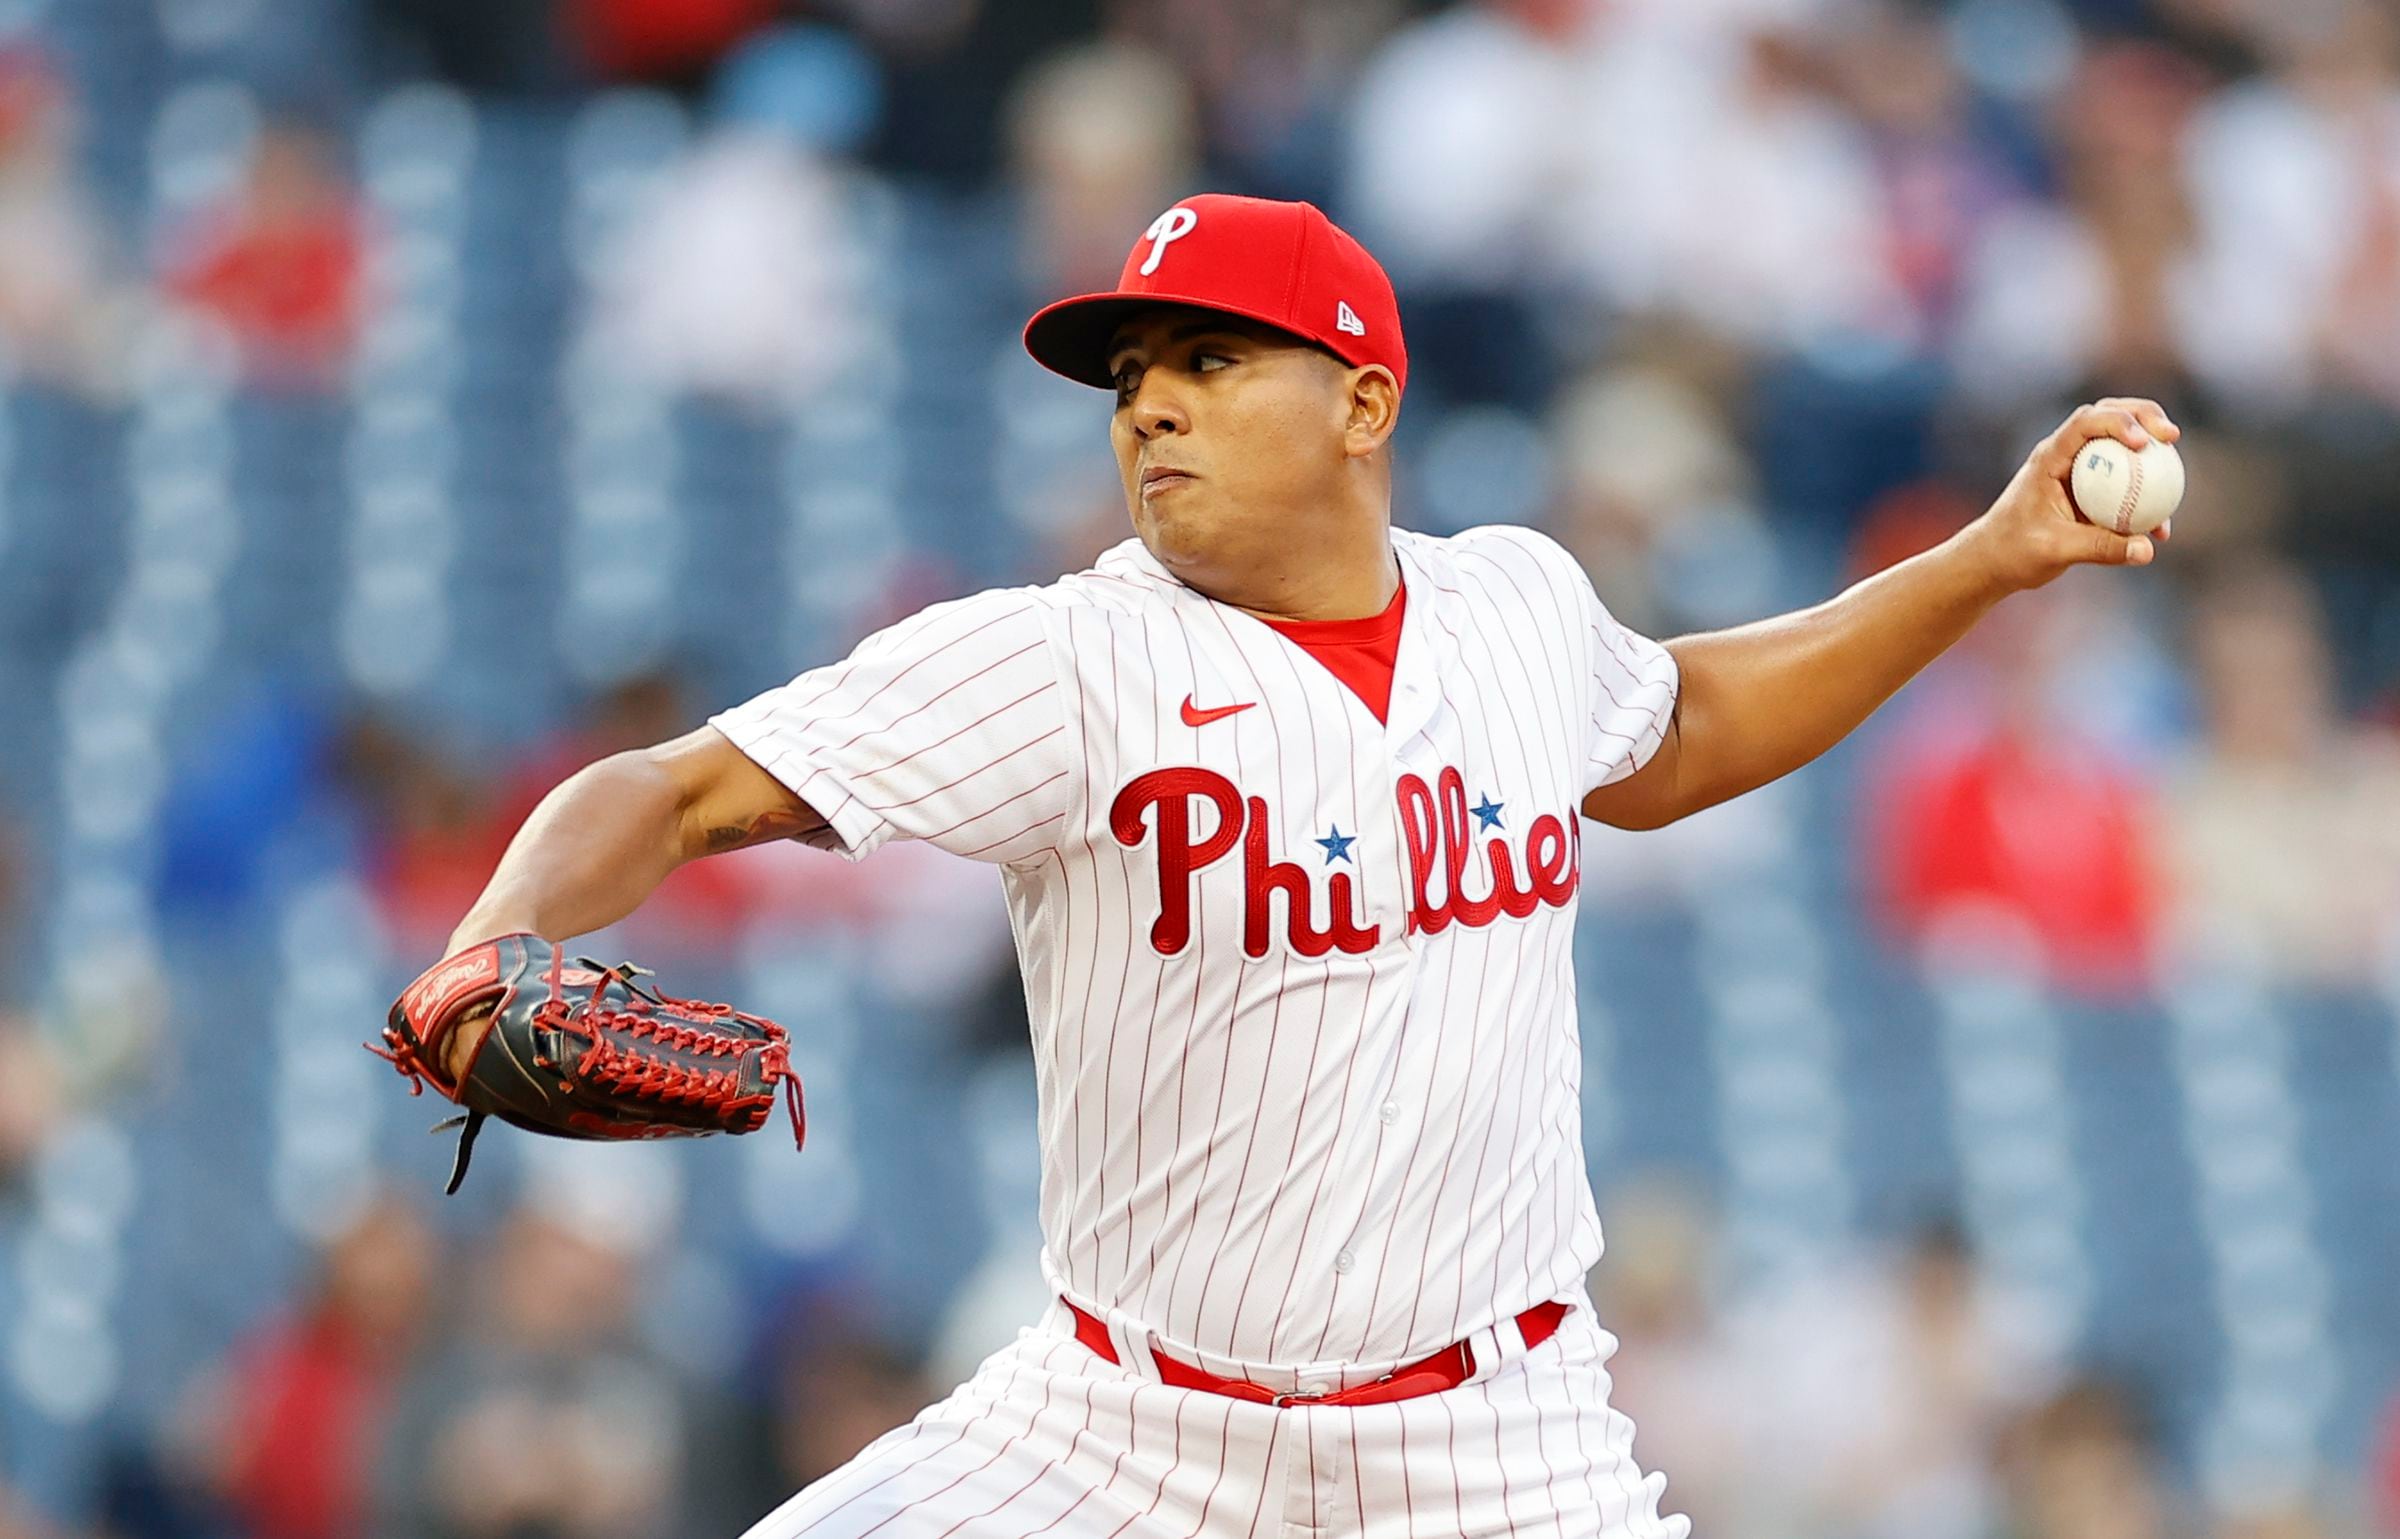 Phillies crowd hails Alec Bohm as hero after Bohm admits to saying